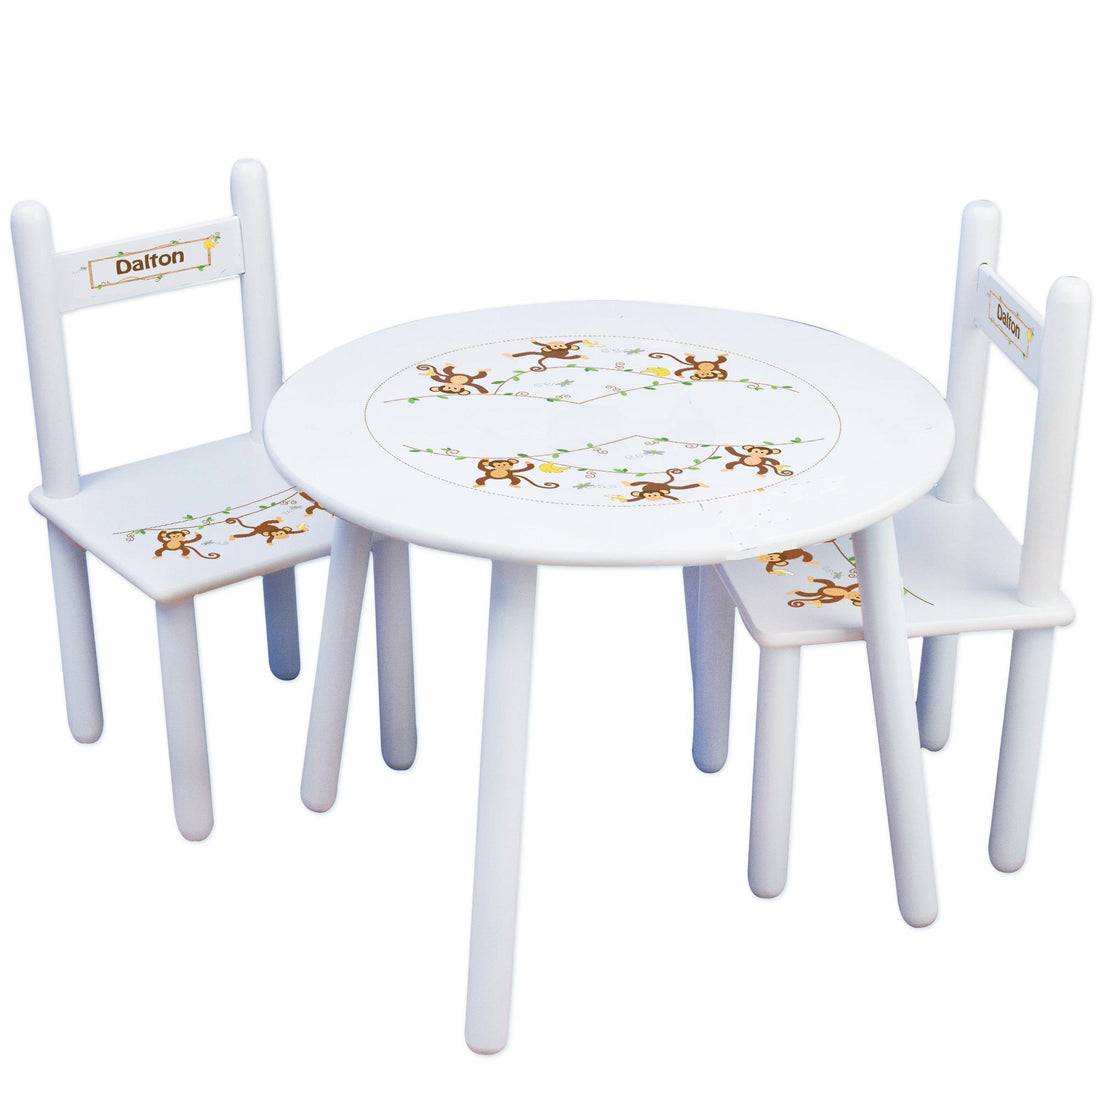 Personalized Table and Chairs with Monkey Boy design